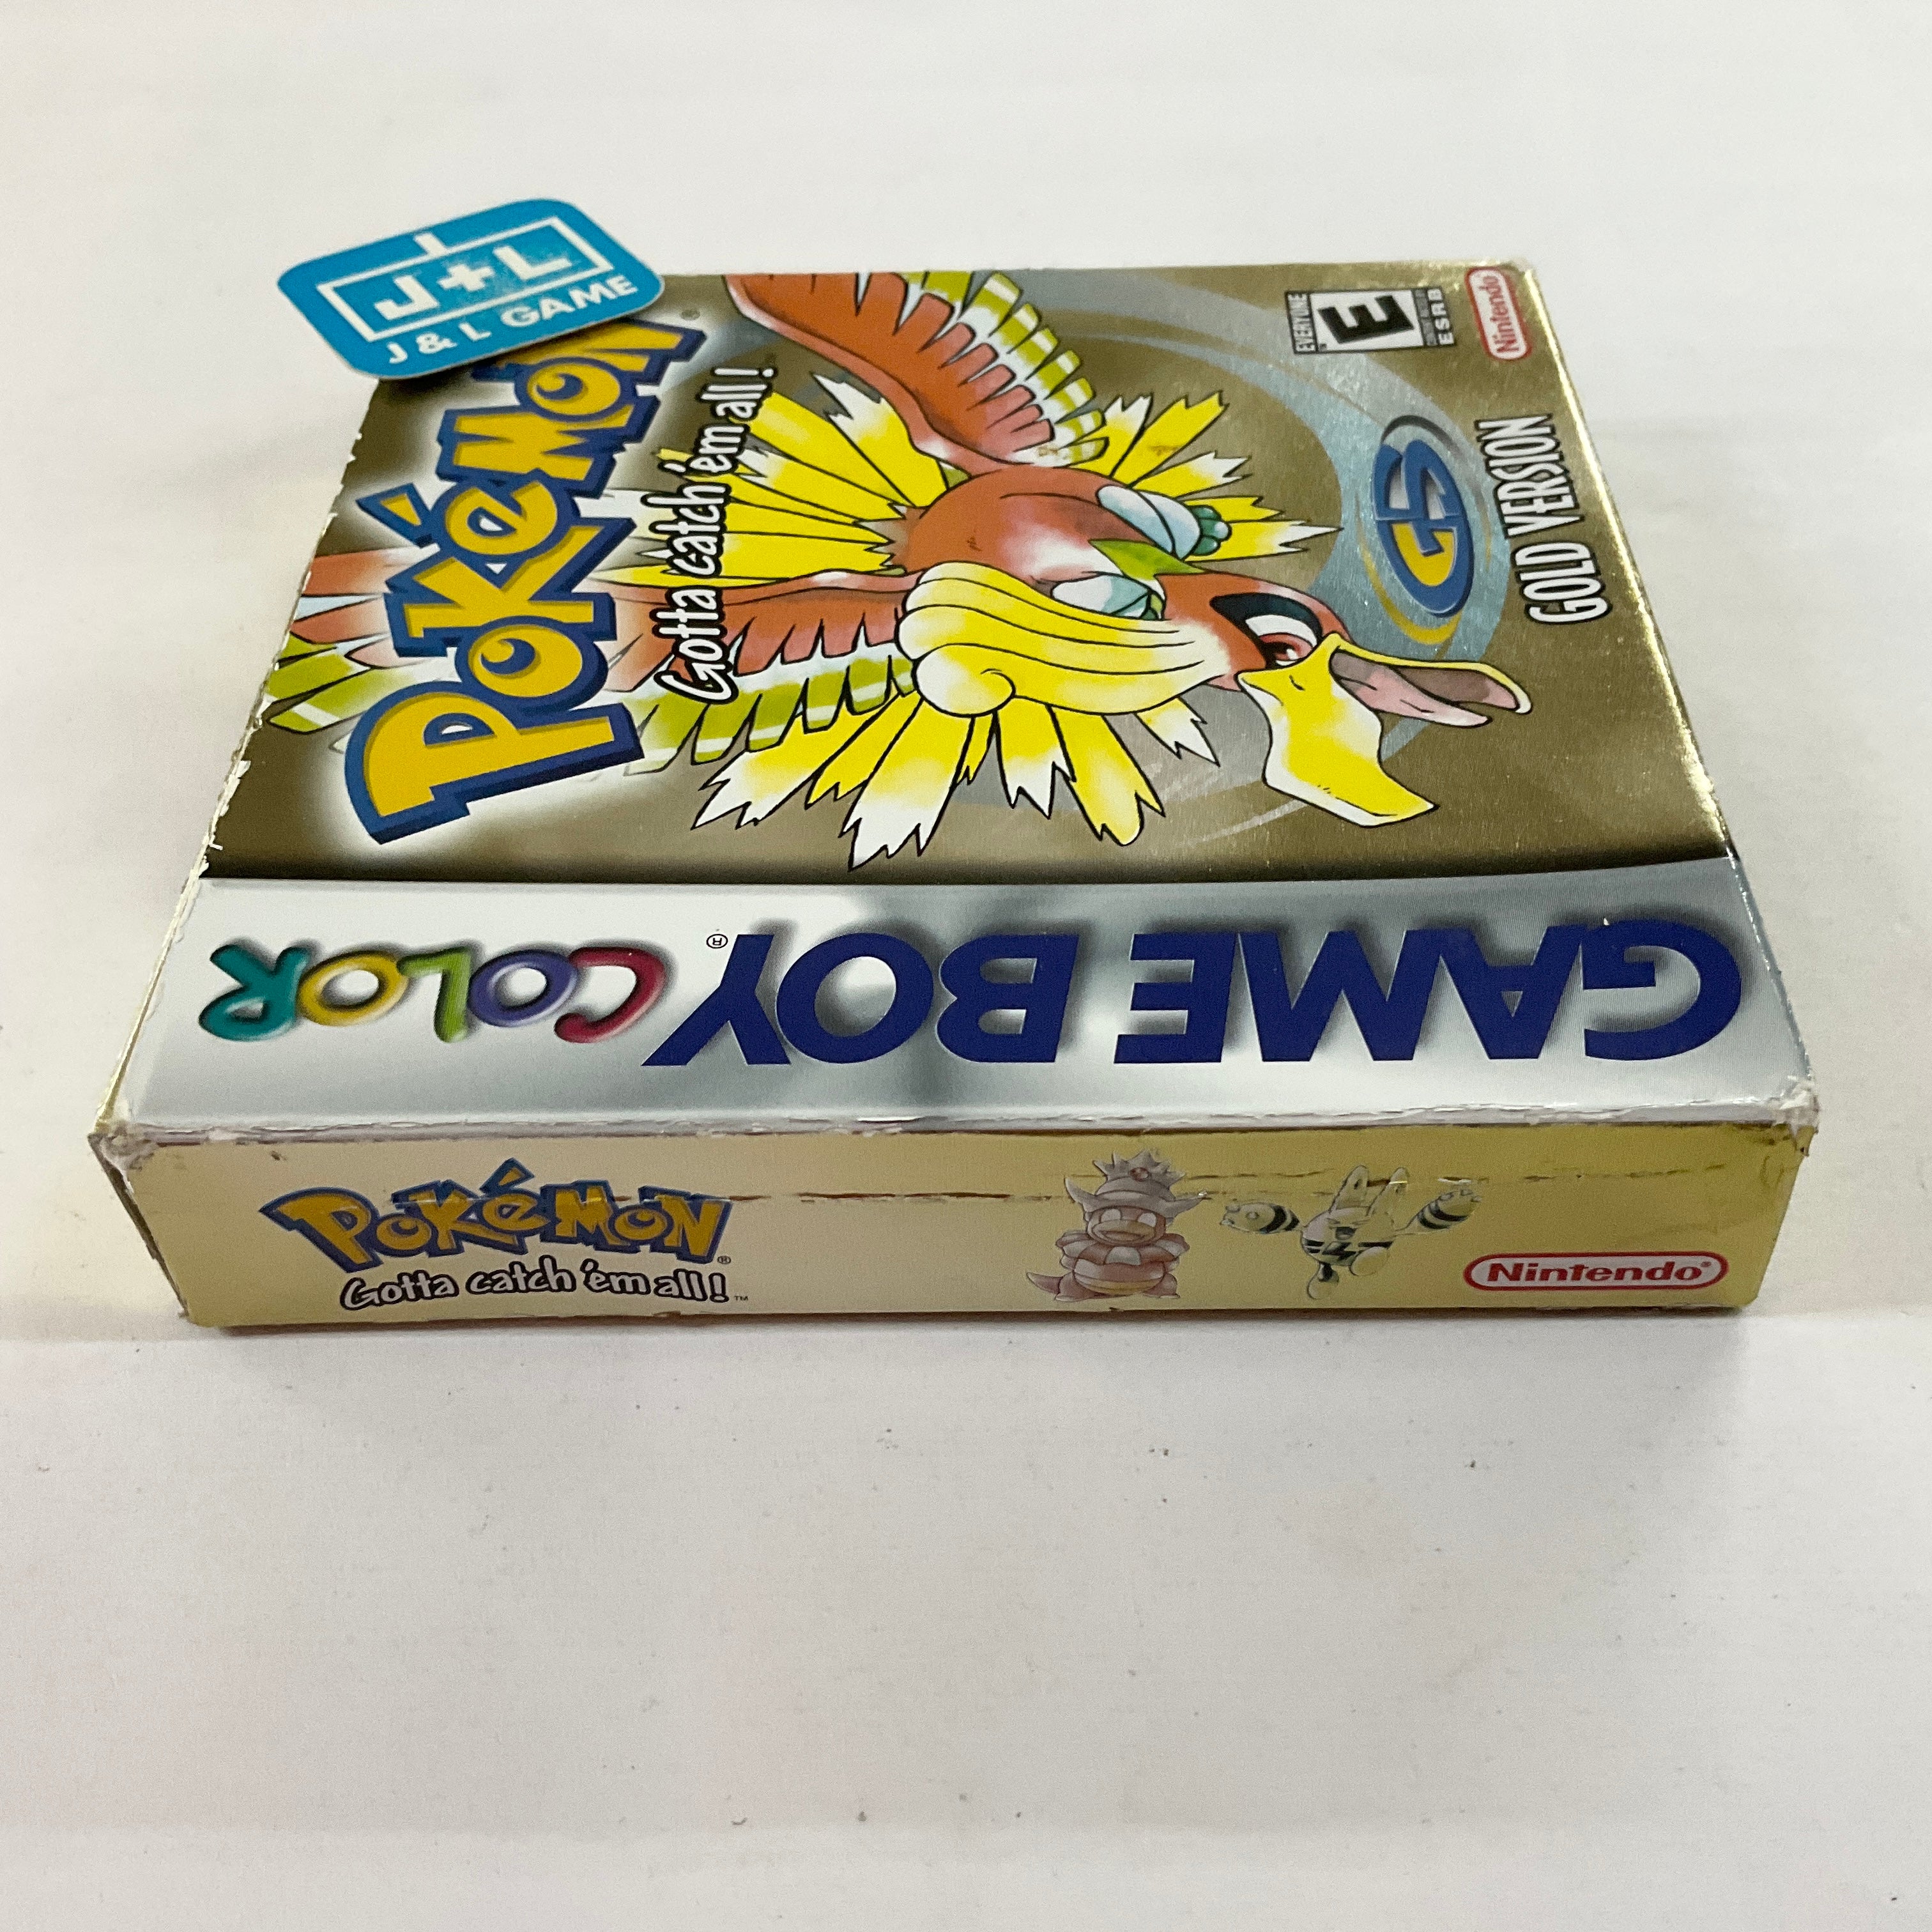 Pokemon Gold Version - (GBC) Game Boy Color [Pre-Owned] Video Games Nintendo   